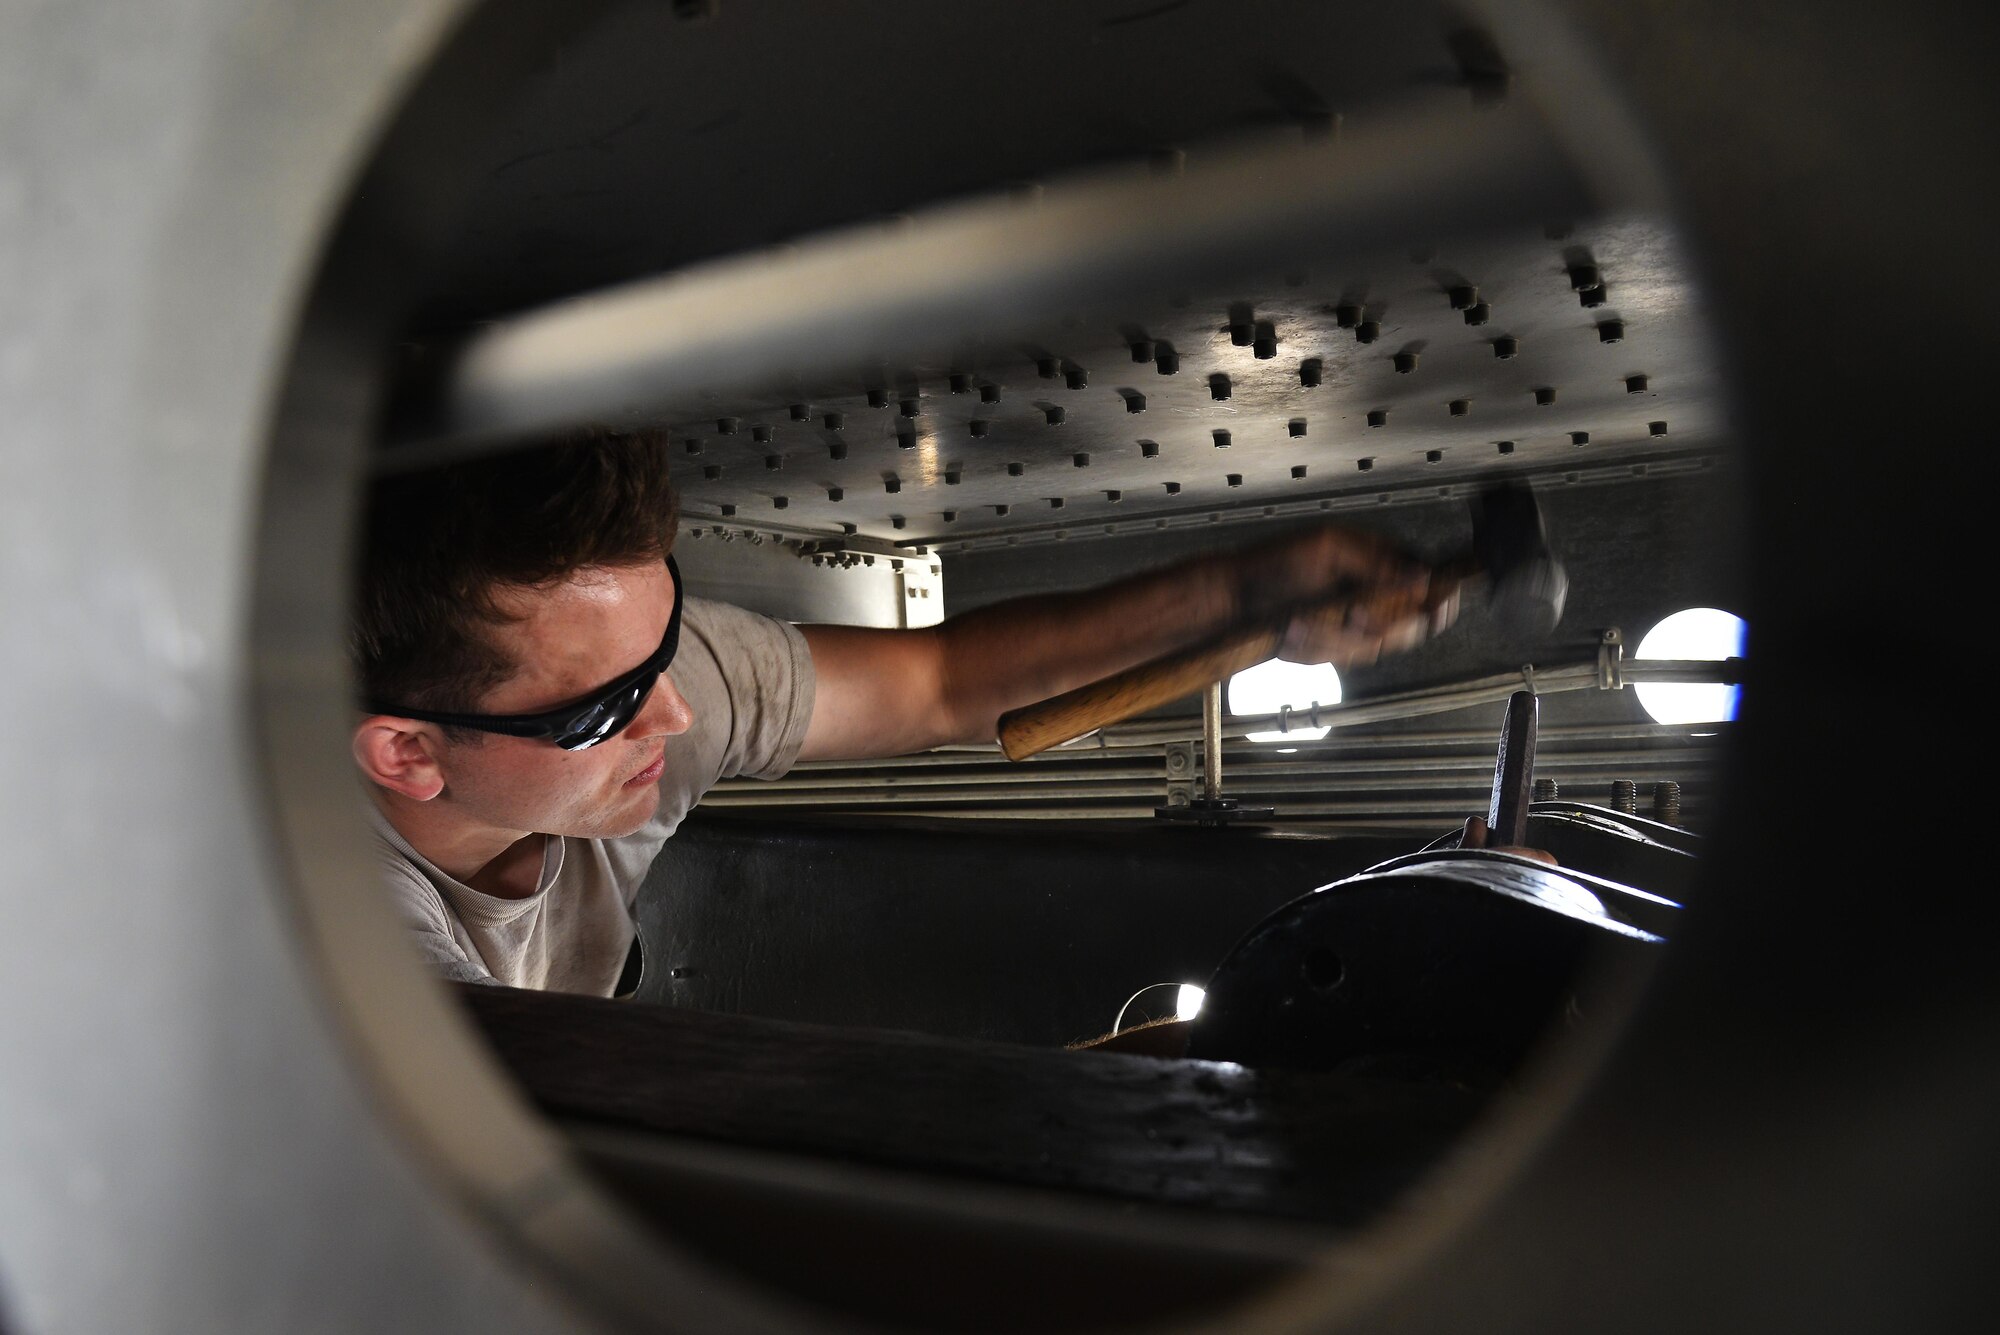 Senior Airman Jacob drives a holding pin in place on a lift cylinder on a 60K aircraft loader during maintenance at an undisclosed location in Southwest Asia May 24, 2015. The holding pin keeps the lift cylinder in place and allows it to lower and raise the aircraft loader. Jacob is a material handling equipment mechanic assigned to the Expeditionary Logistics Readiness Squadron. Due to safety and security reasons, last names and unit designators were removed. (U.S. Air Force photo/Tech. Sgt. Christopher Boitz) 